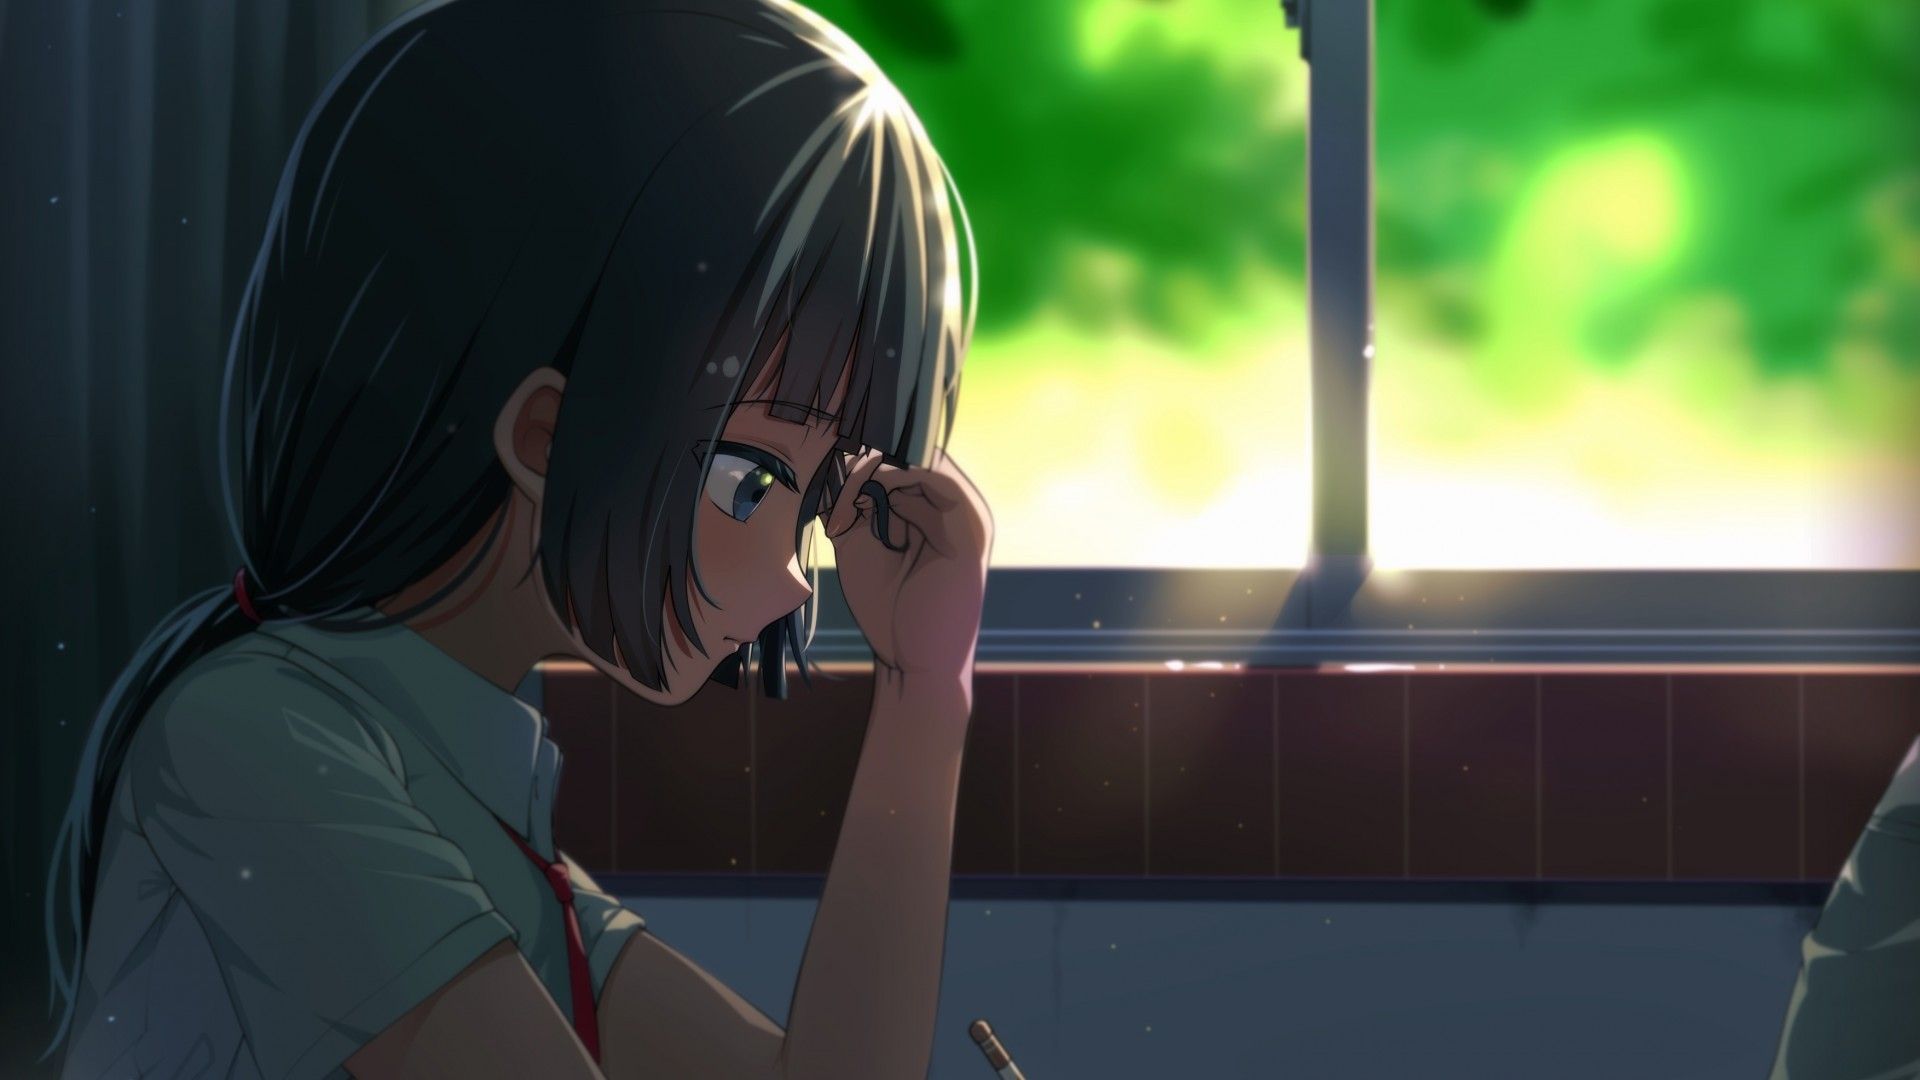 Download 1920x1080 Anime Girl, Studying, Classroom, Profile View, Ponytail, Windows Wallpaper for Widescreen